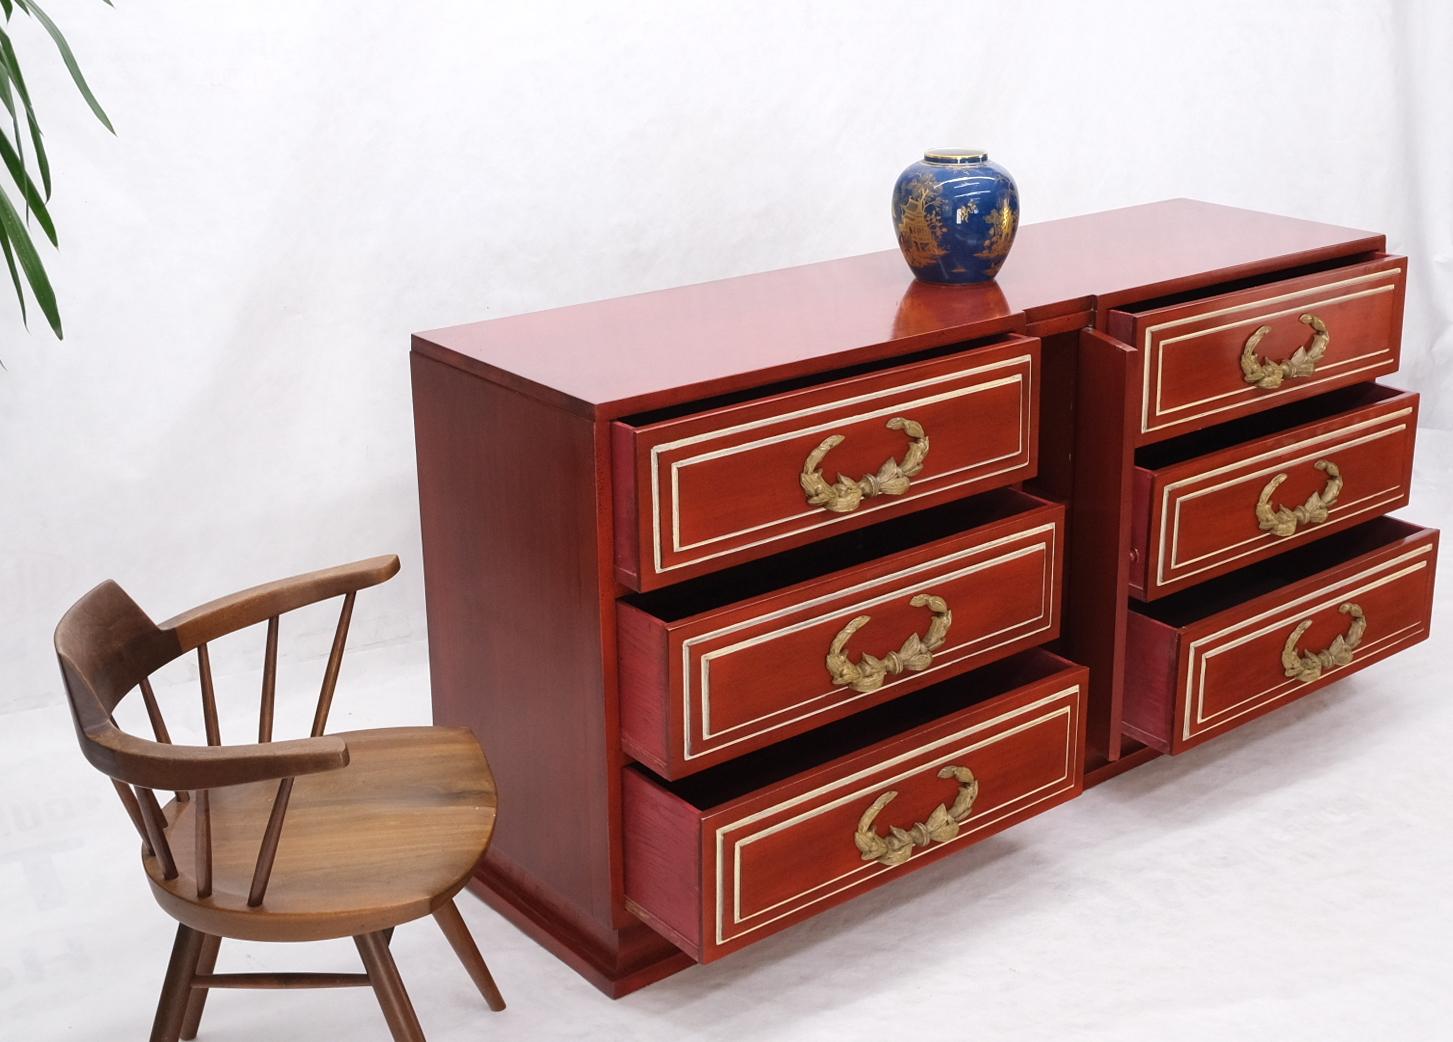 20th Century Directoire Style Blood Tomato Red Lacquer Super Heavy Solid Brass Pulls Dresser For Sale